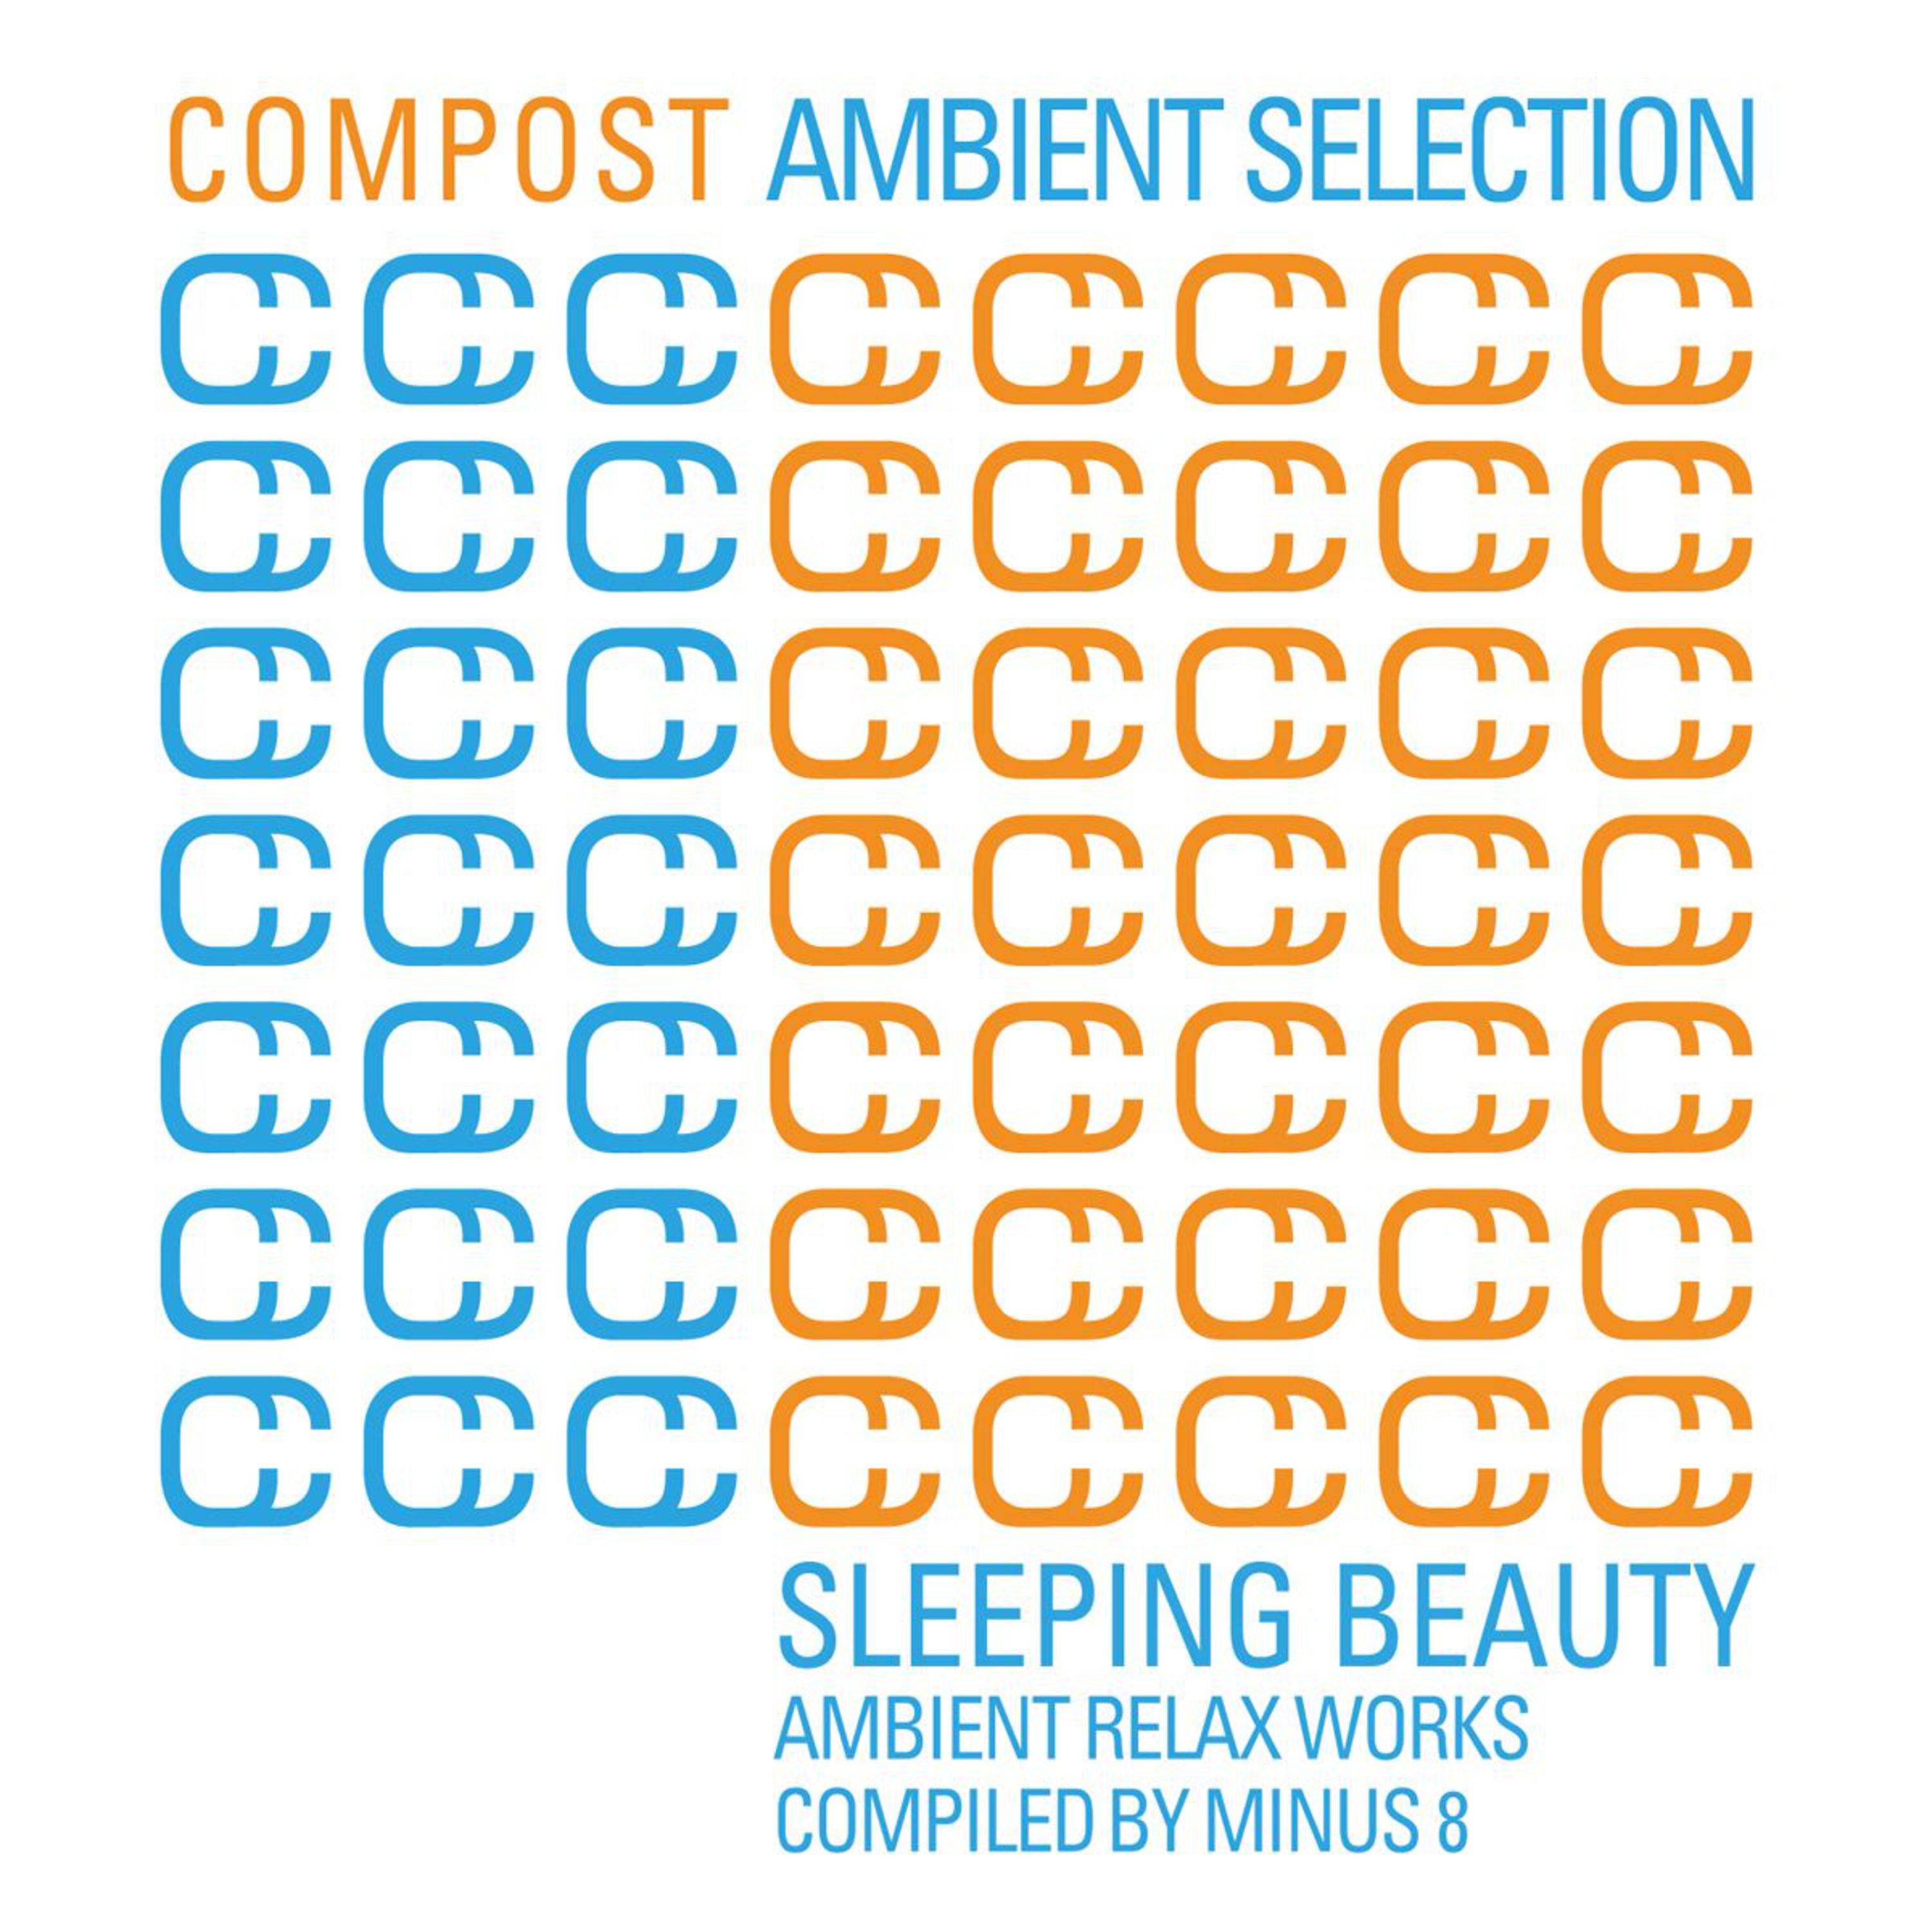 Compost Ambient Selection - Sleeping Beauty - compiled by Minus 8